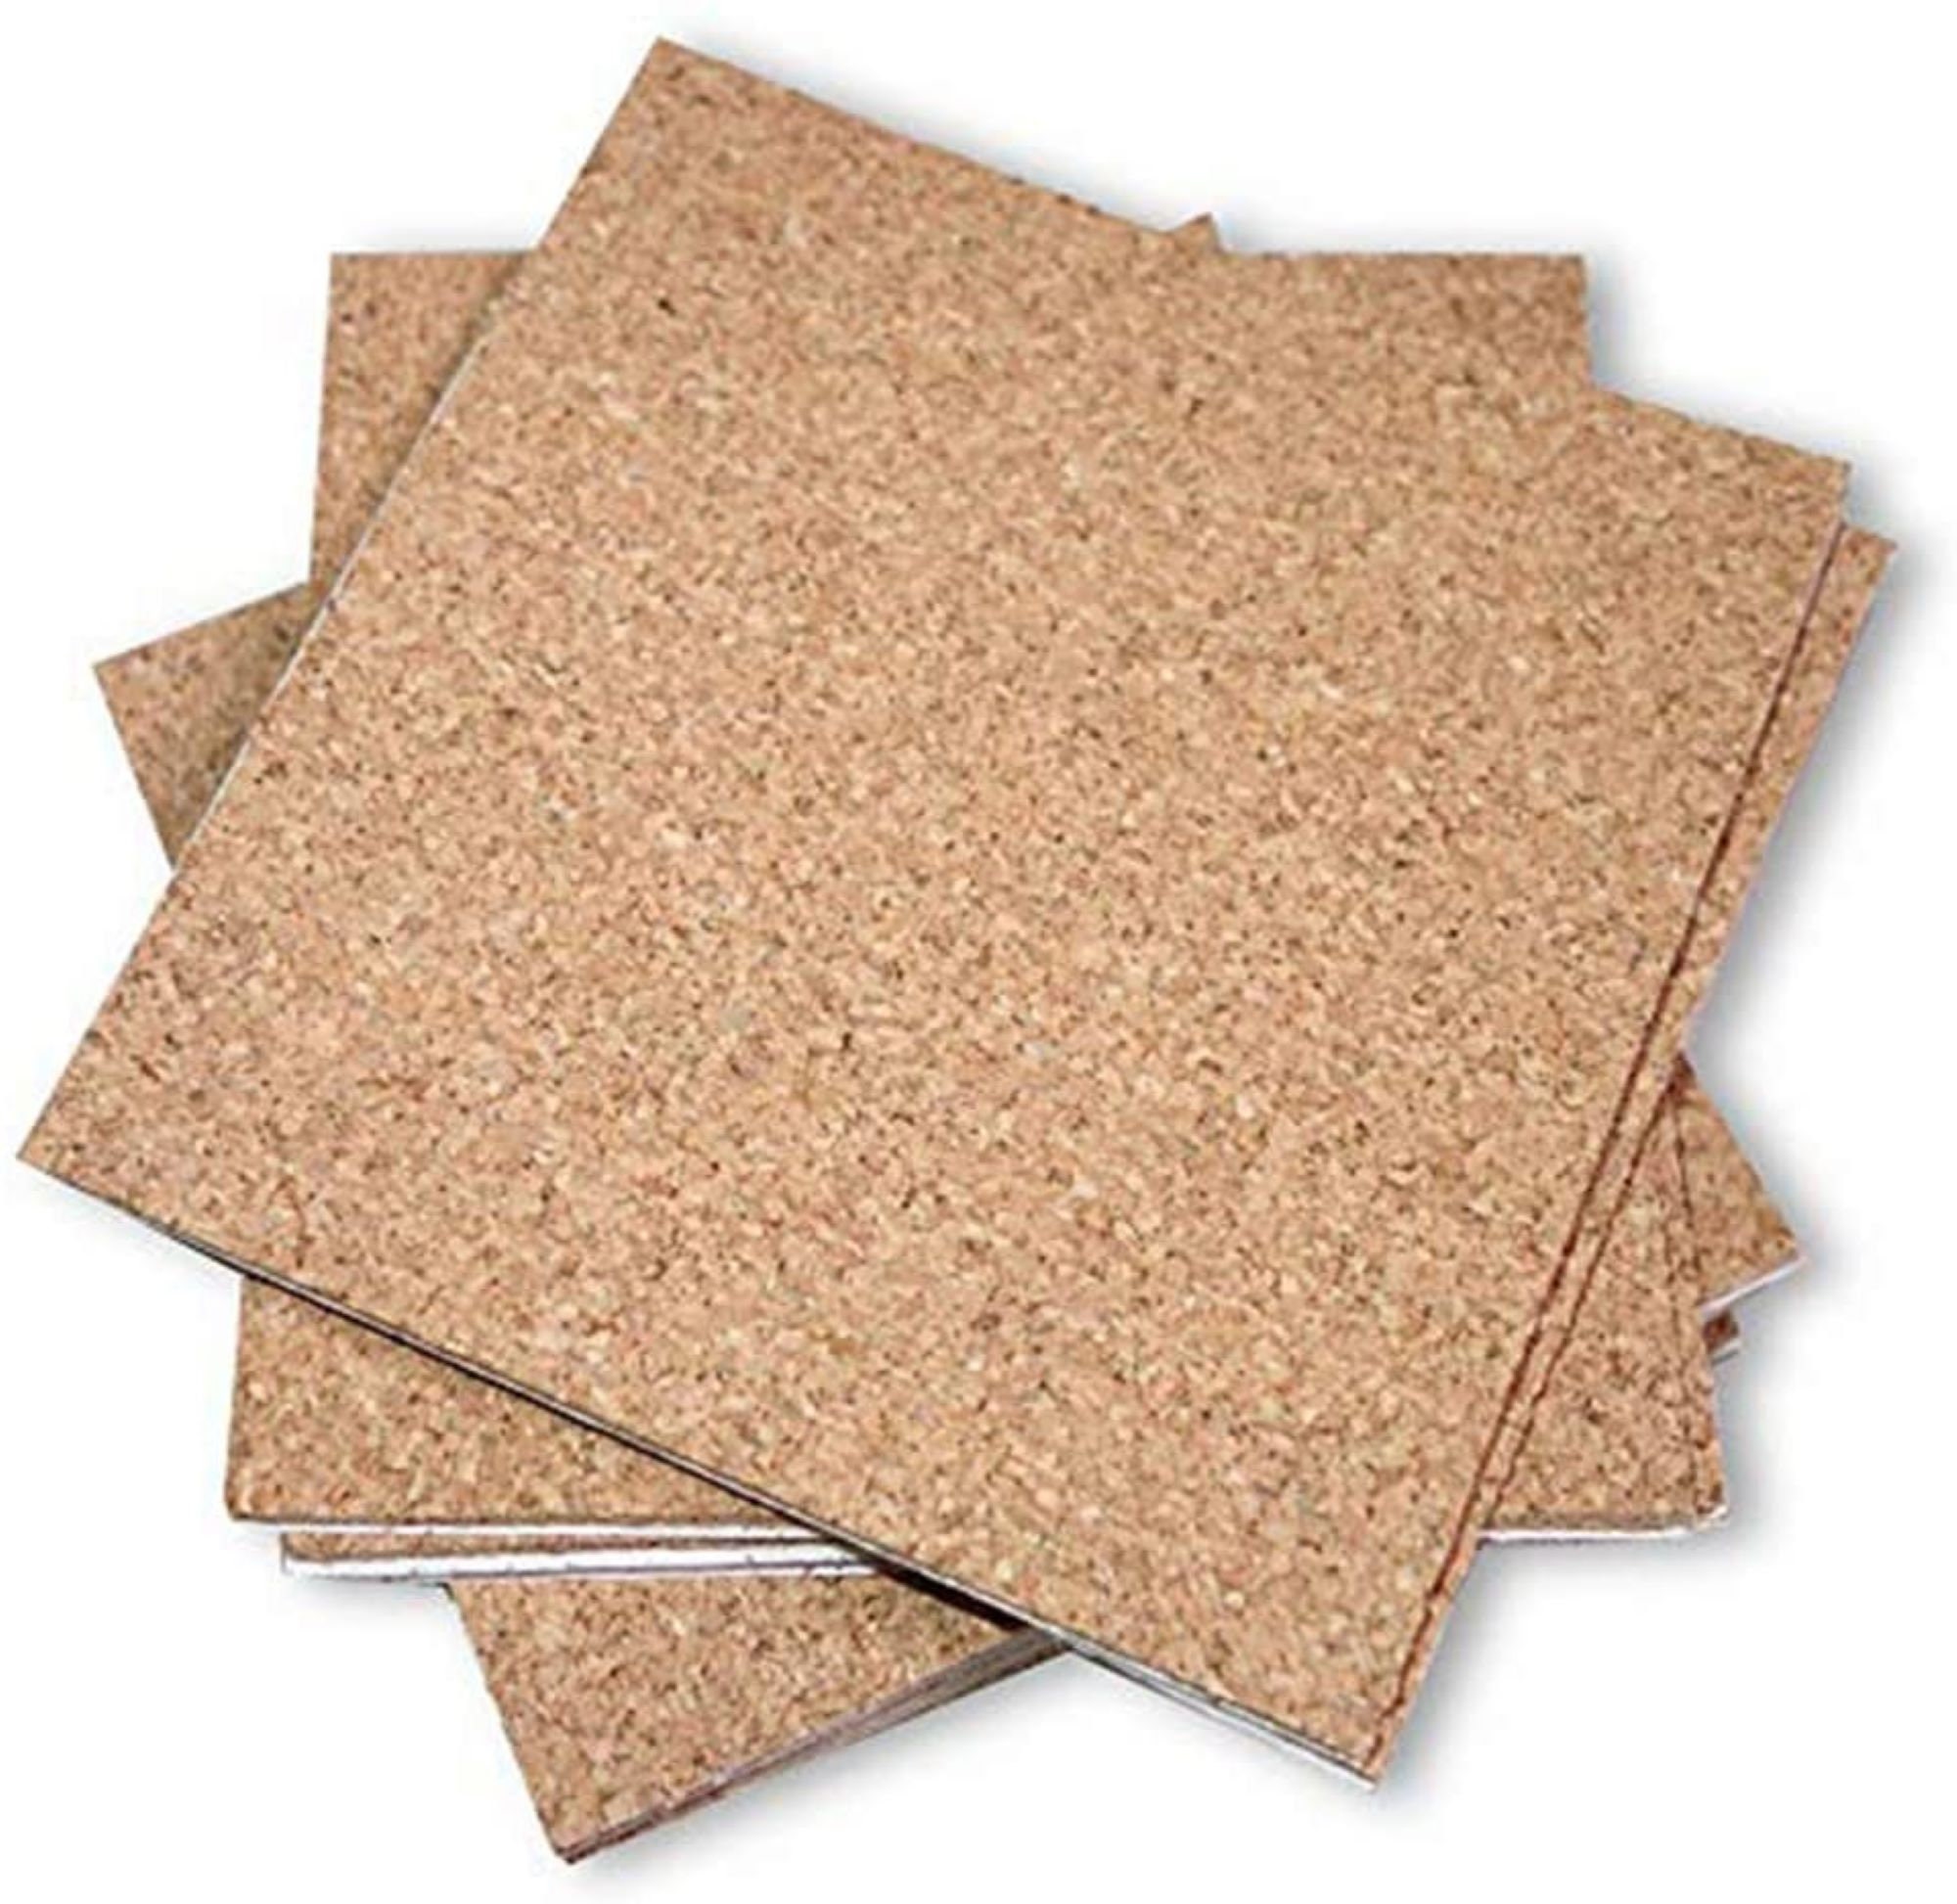 110 Count 4 X 4 Self Adhesive Cork for Coasters for Wood, Stone and Ceramic  Tile. 